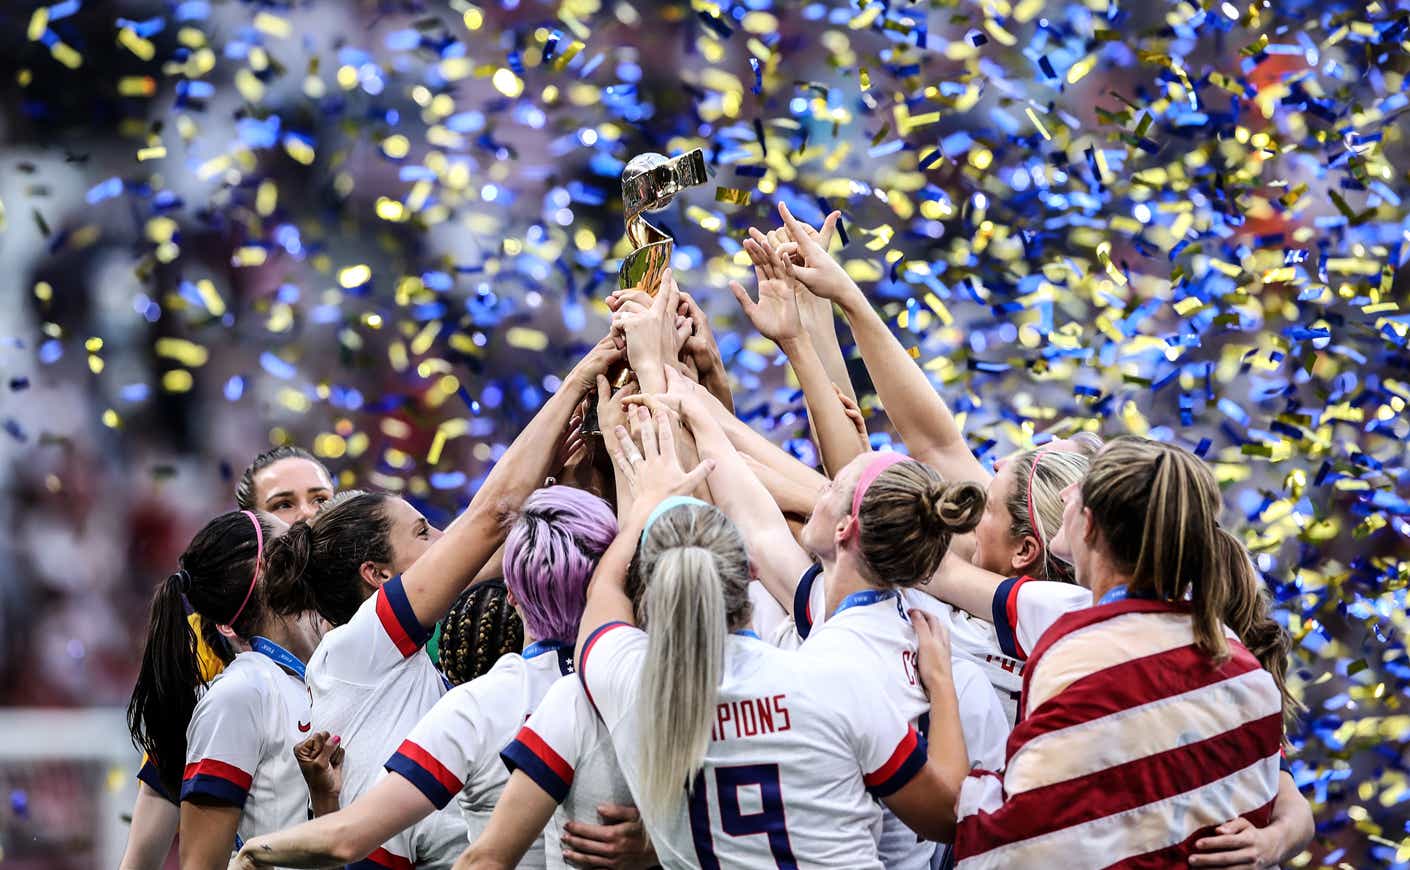 the US women's national soccer team at the 2019 world cup